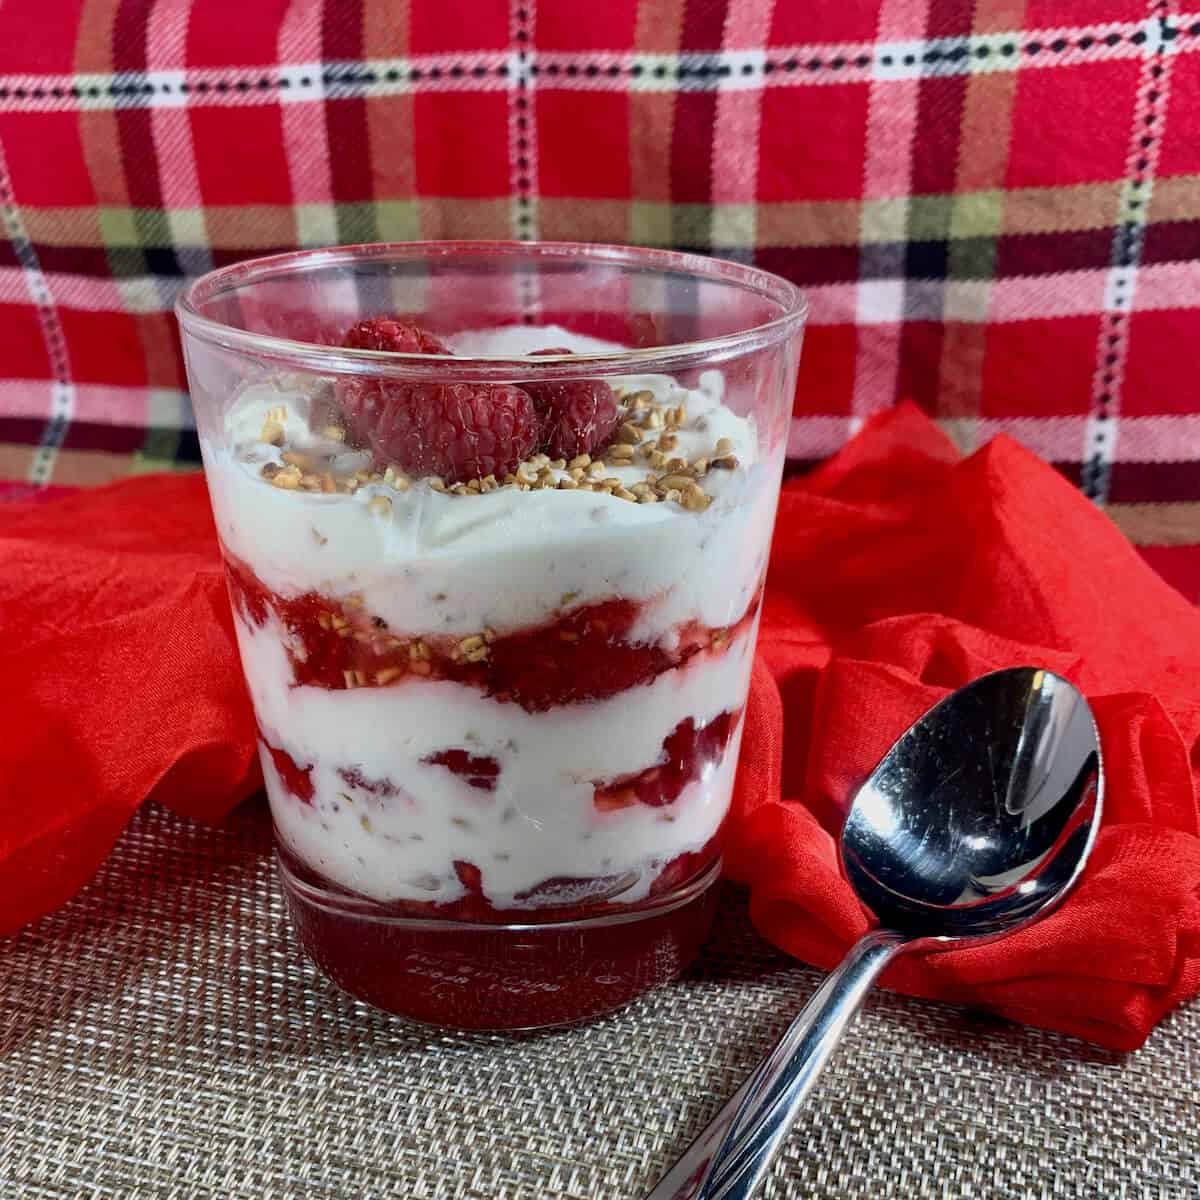 Glass filled with Cranachan layers next to a spoon on a red & plaid scarf.